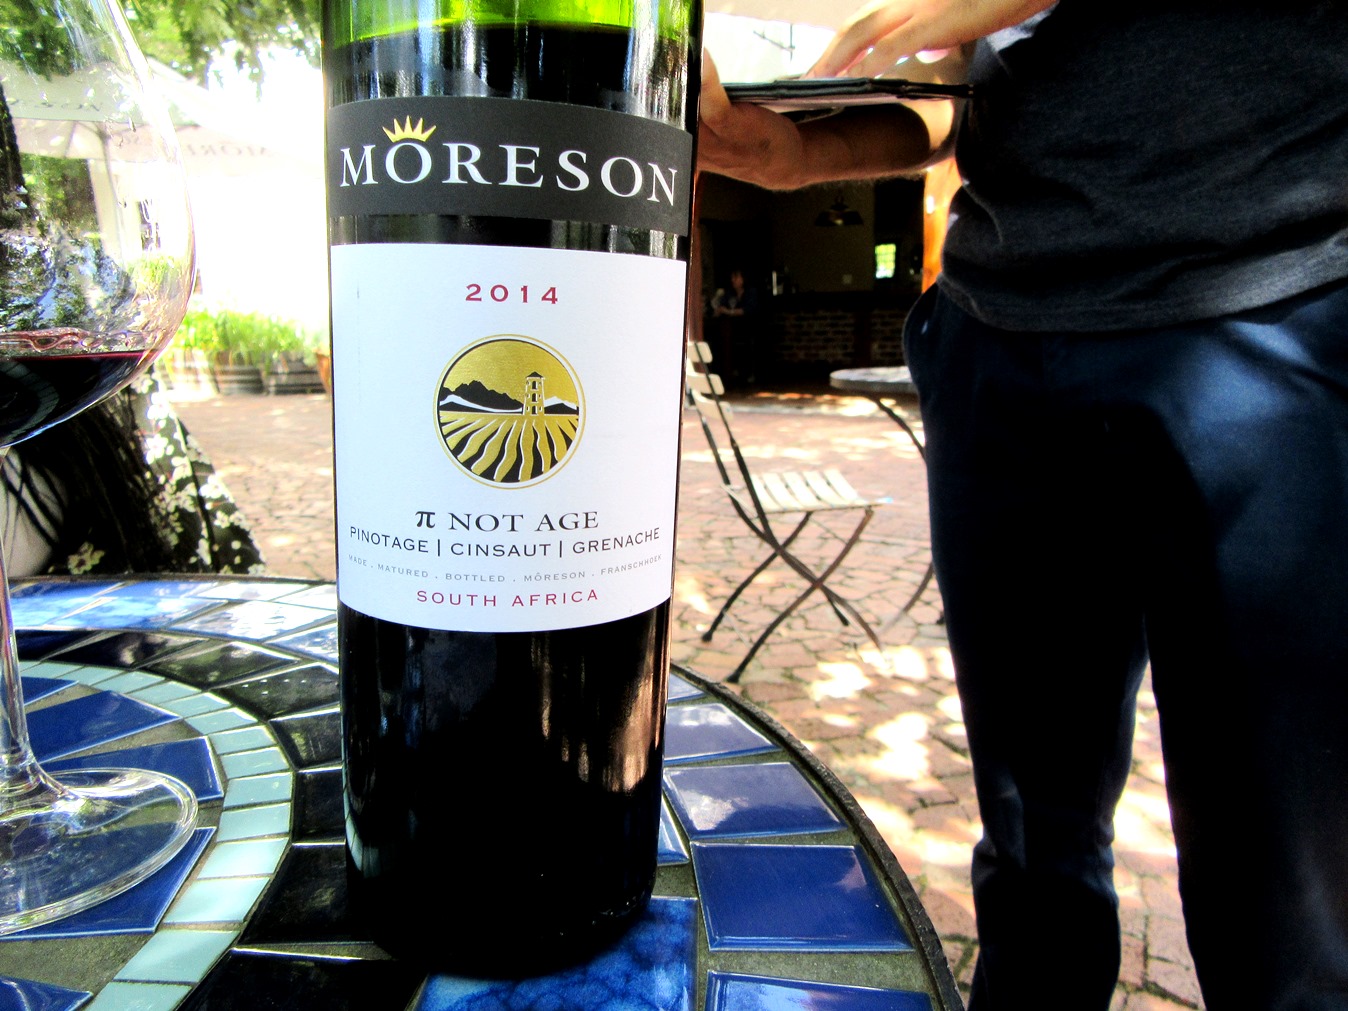 Moreson, ? Not Age Pinotage Cinsault Grenache 2014, Coastal Region, South Africa, Wine Casual